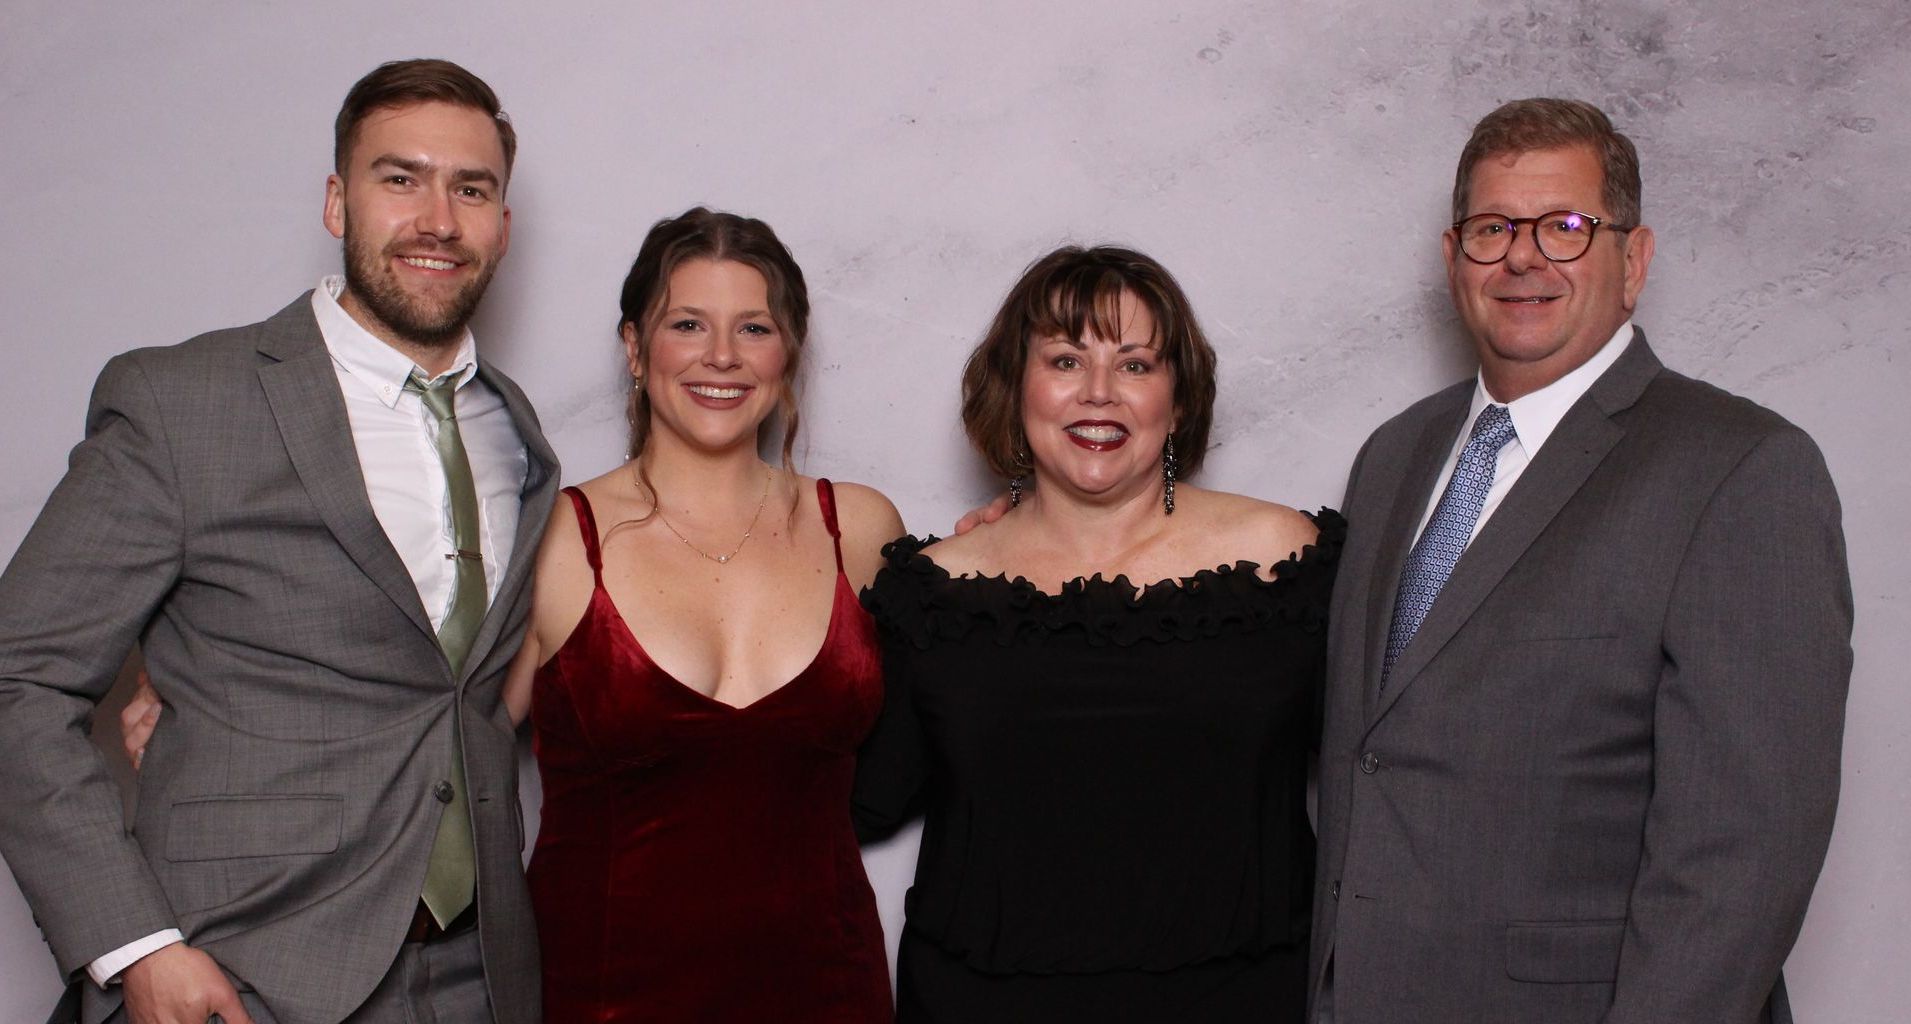 Couples at a non-profit gala event smiling at the Ever After Photo Booth